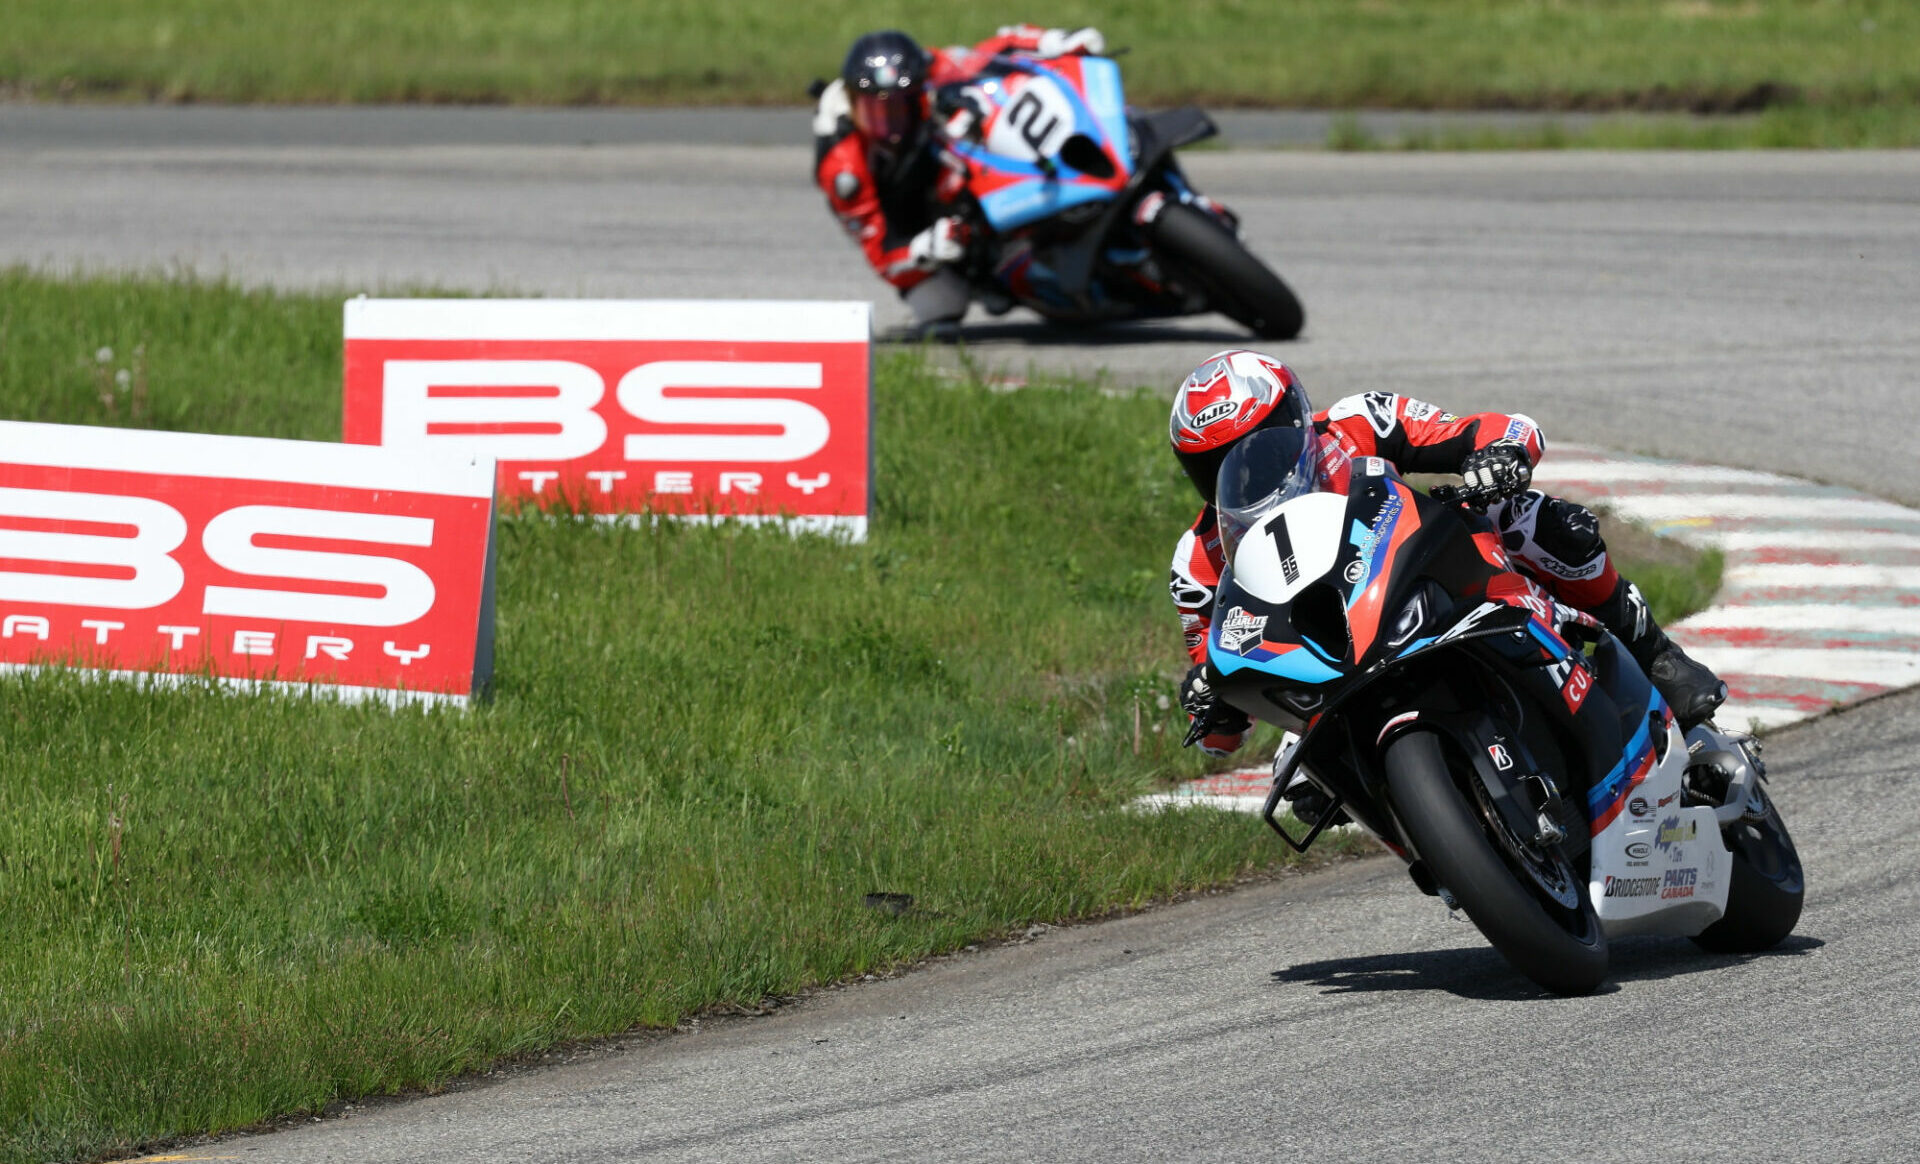 Defending CSBK champion Ben Young (1) dominated Sunday's GP Bikes Pro Superbike race at Shannonville Motorsport Park - winning by over 17 seconds ahead of Sam Guerin (2). Photo by Rob O'Brien, courtesy CSBK.